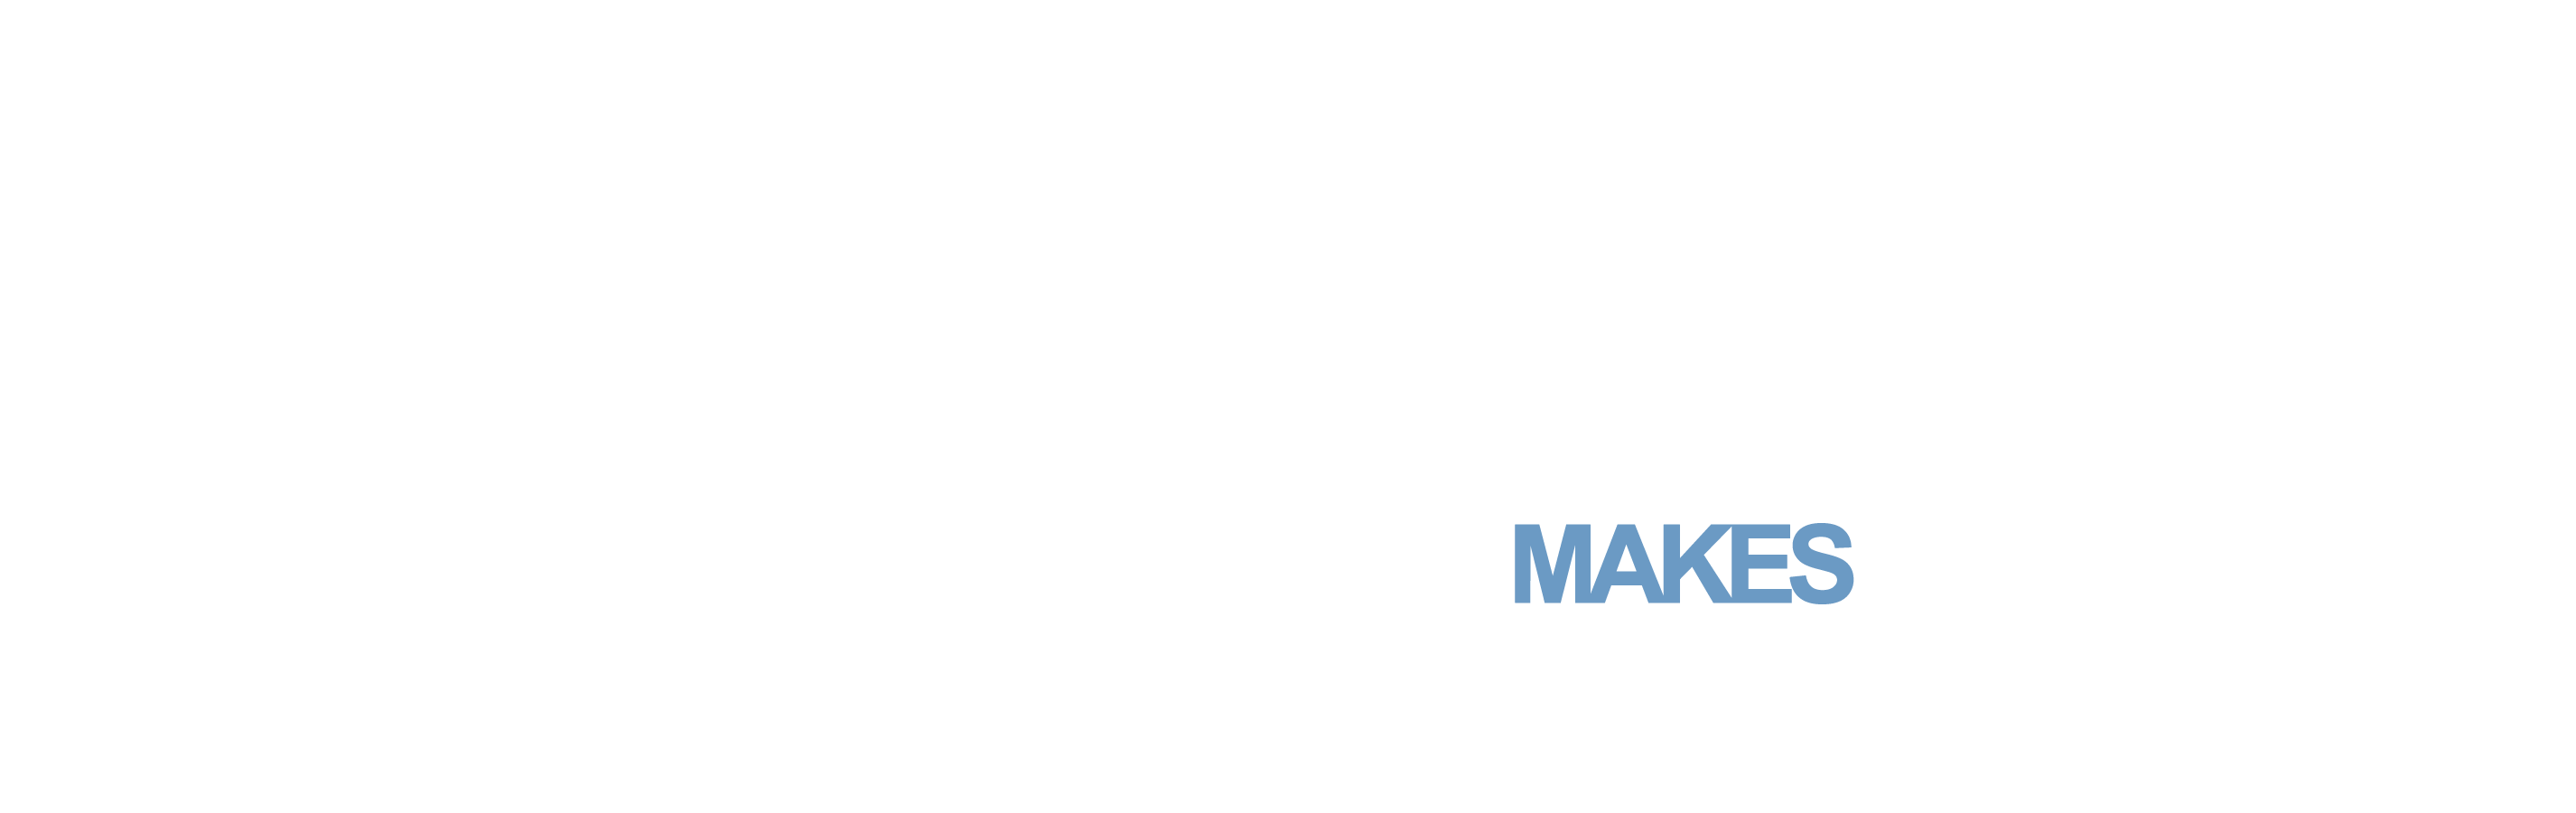 MAKES by SWAKES